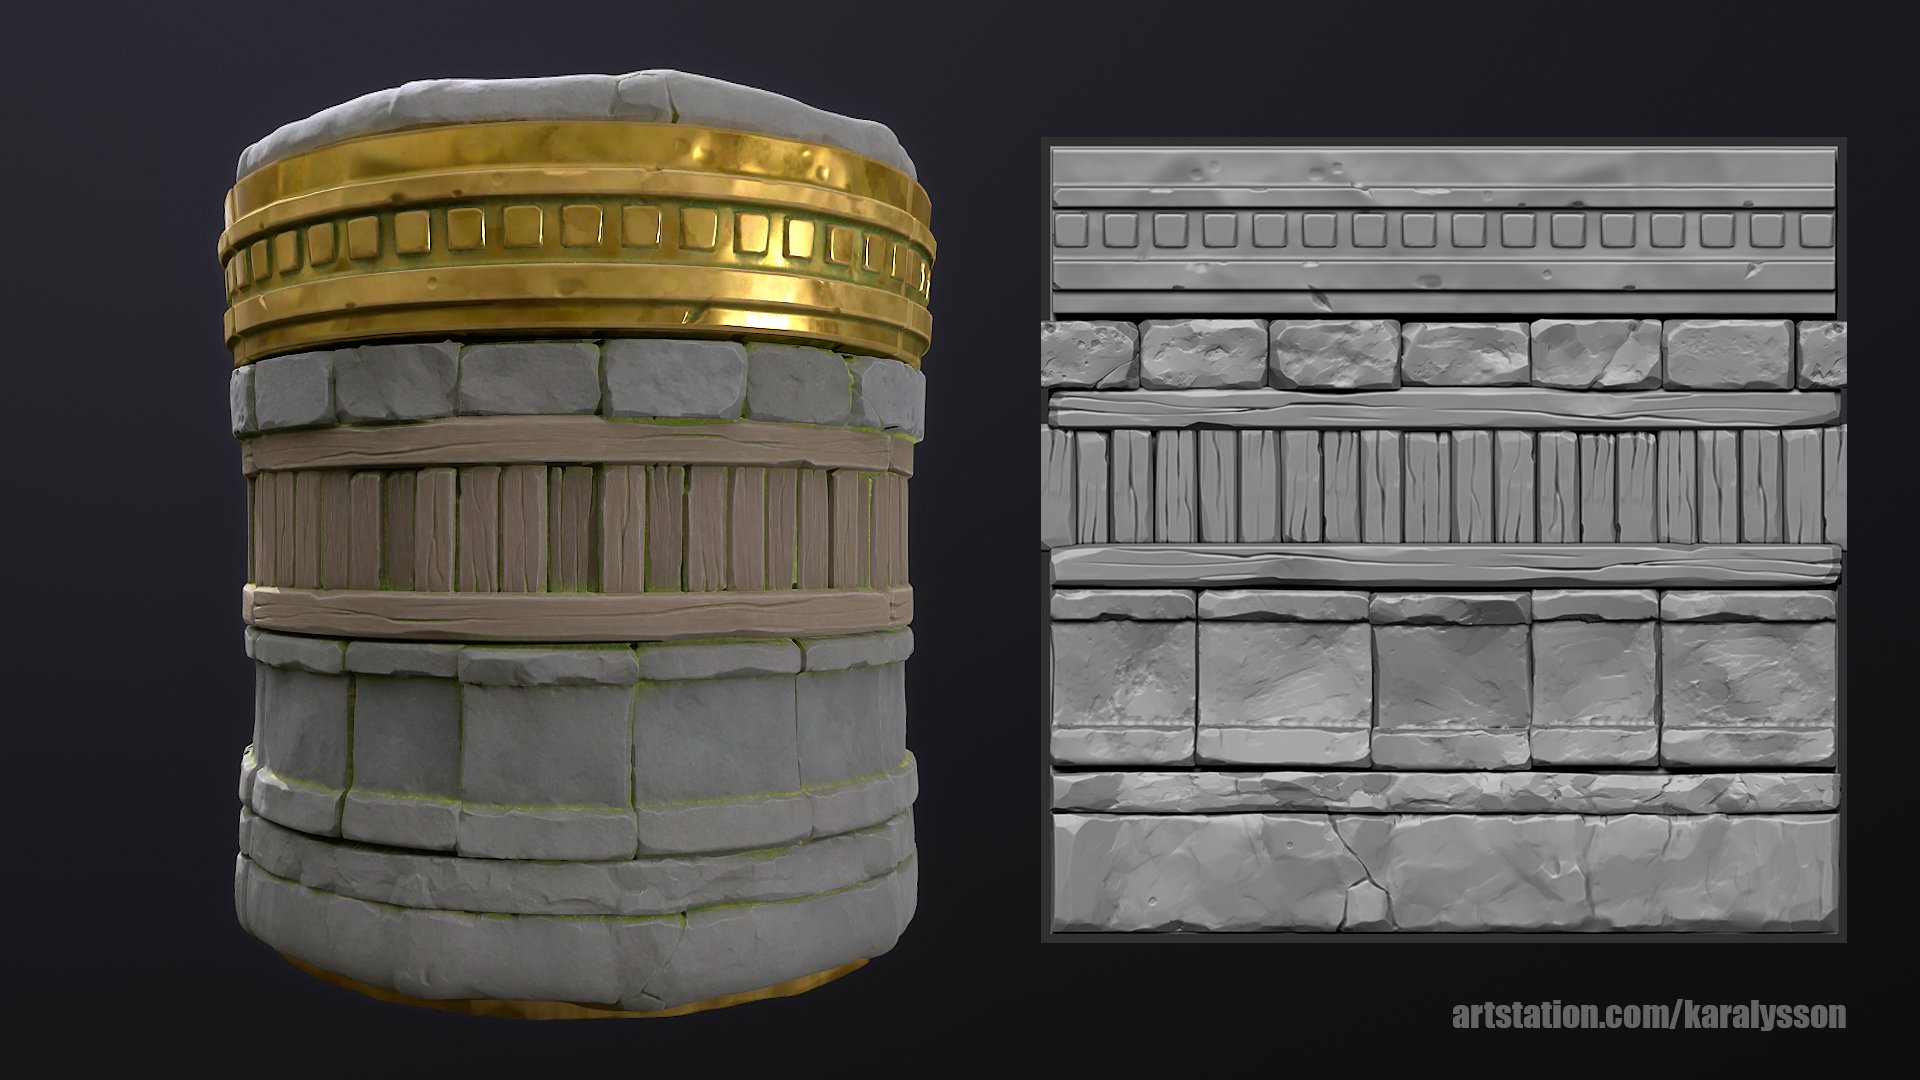 råb op Forretningsmand Konklusion Alysson Soares on Twitter: "I just want to share this Trim sheet  https://t.co/qSlnFOZD1h #3dart #texture #zbrush #SubstanceDesigner #gameart  #gamedev #sculpt https://t.co/RwVzHbPxkC" / X